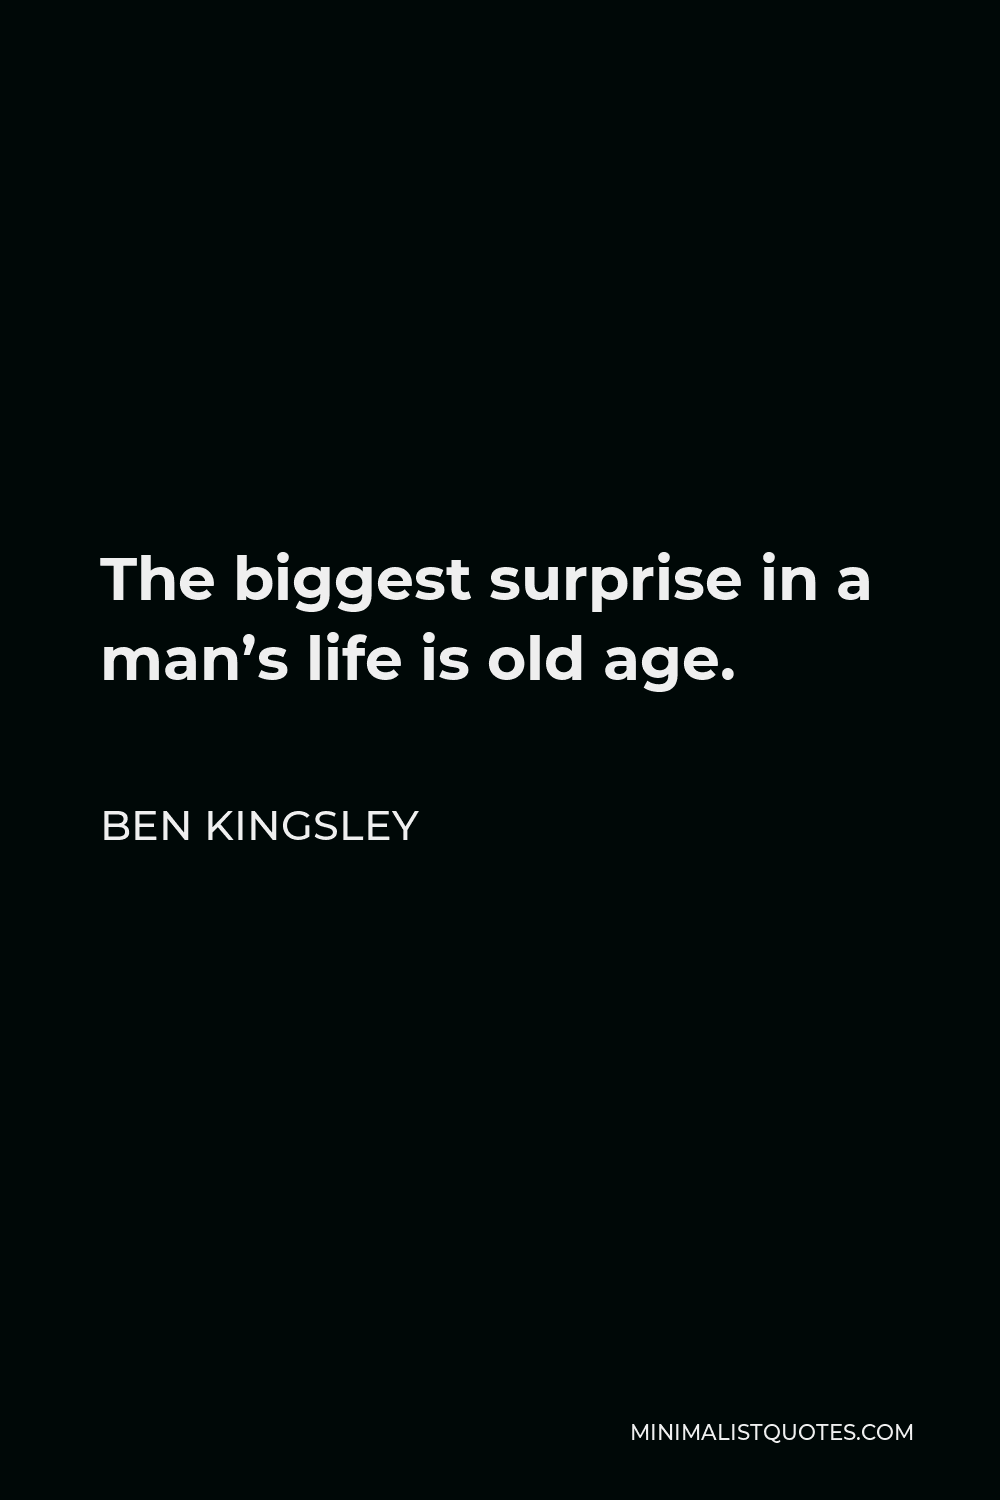 Ben Kingsley Quote - The biggest surprise in a man’s life is old age.